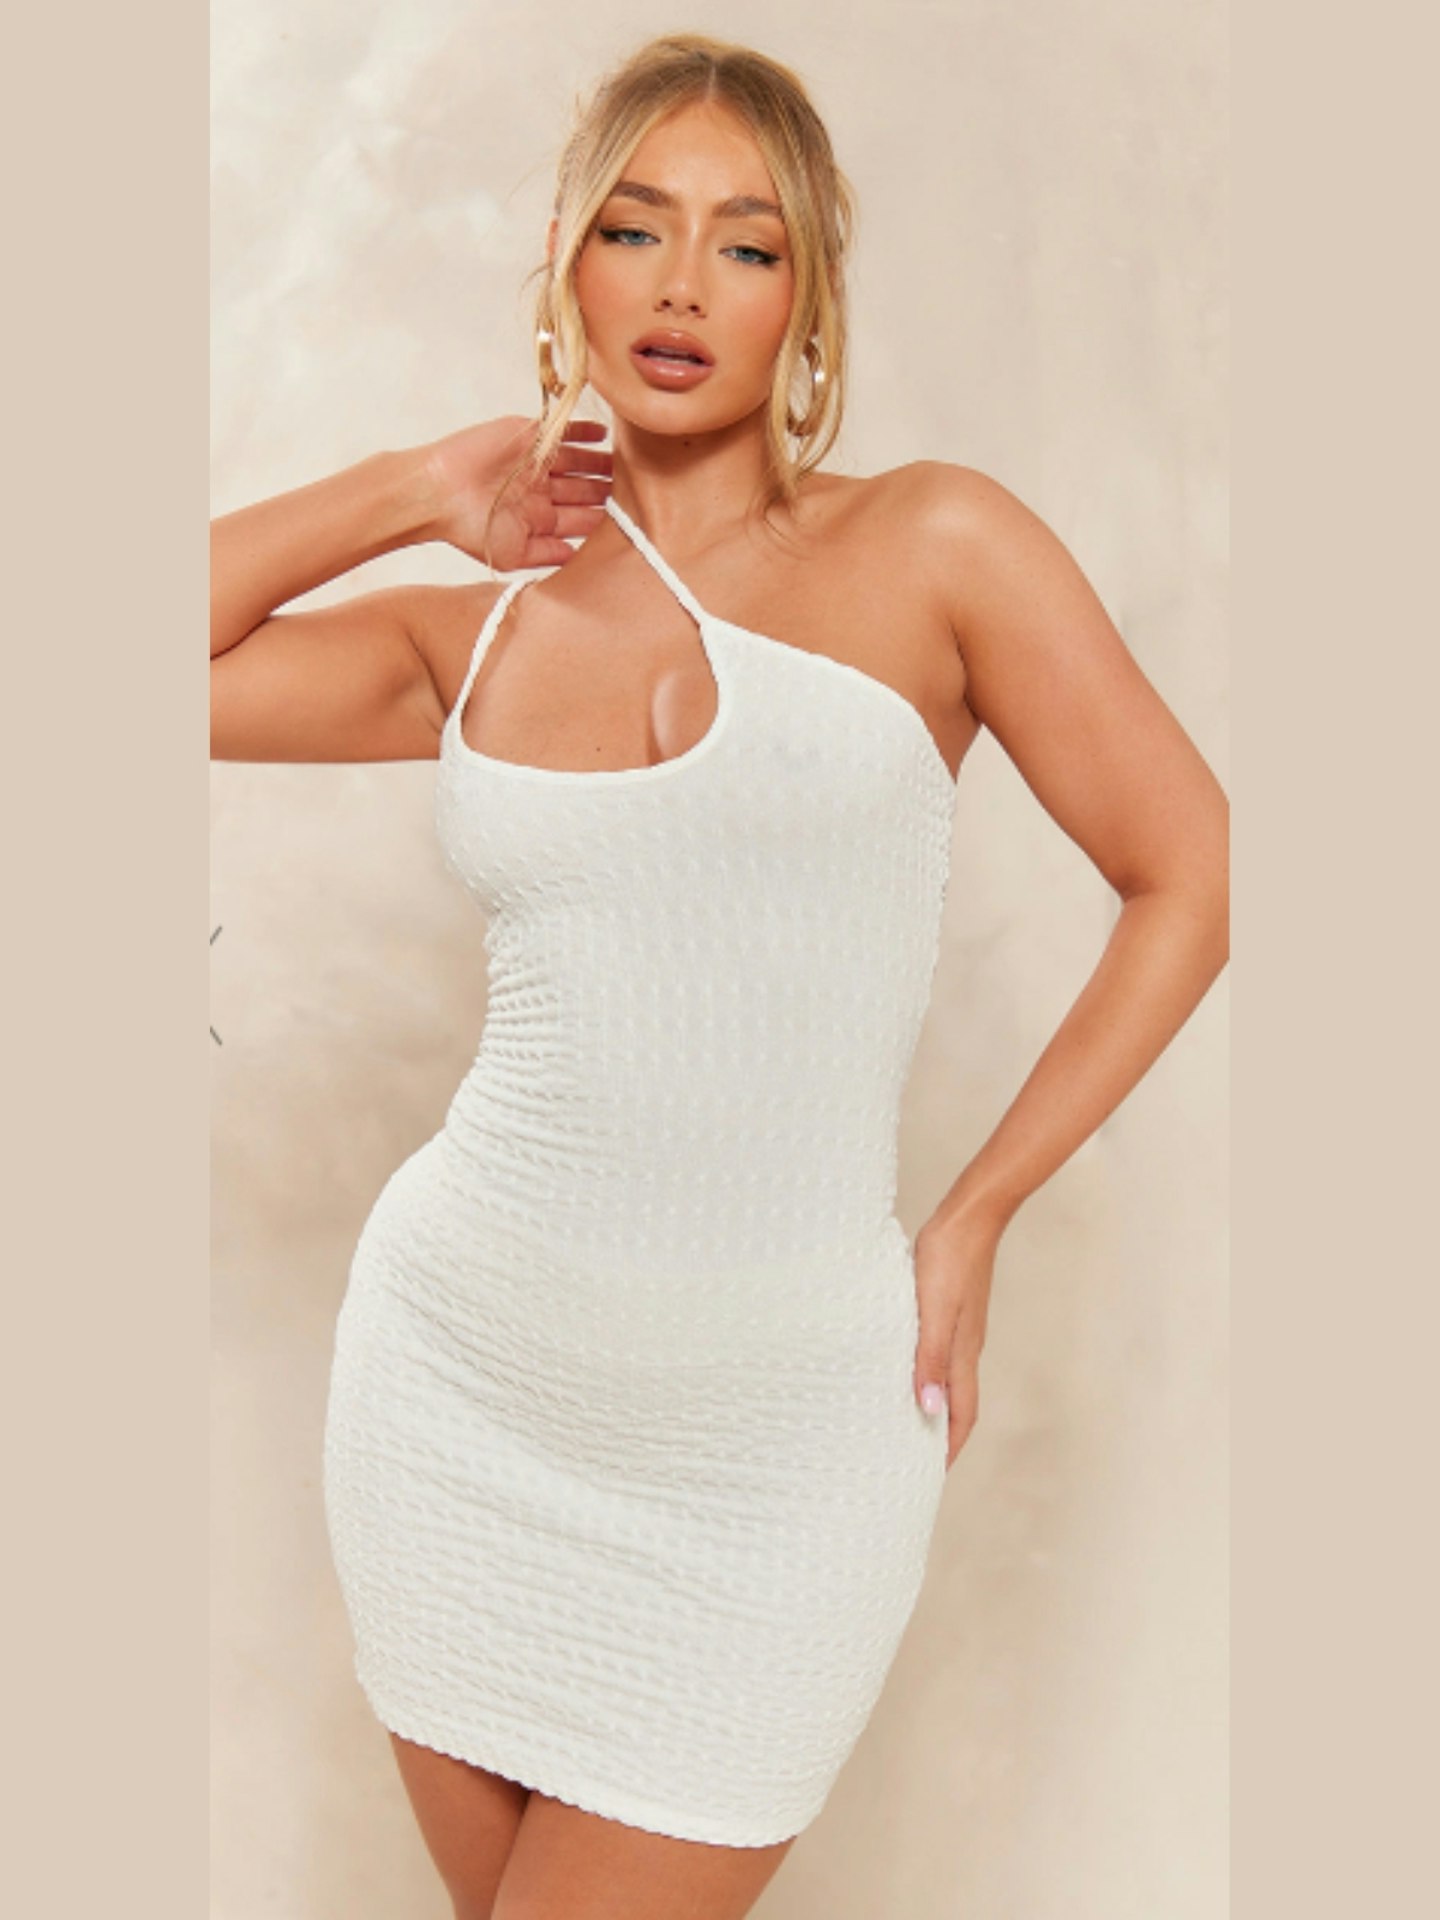 Skims Dress Dupe, Gallery posted by paytonlee